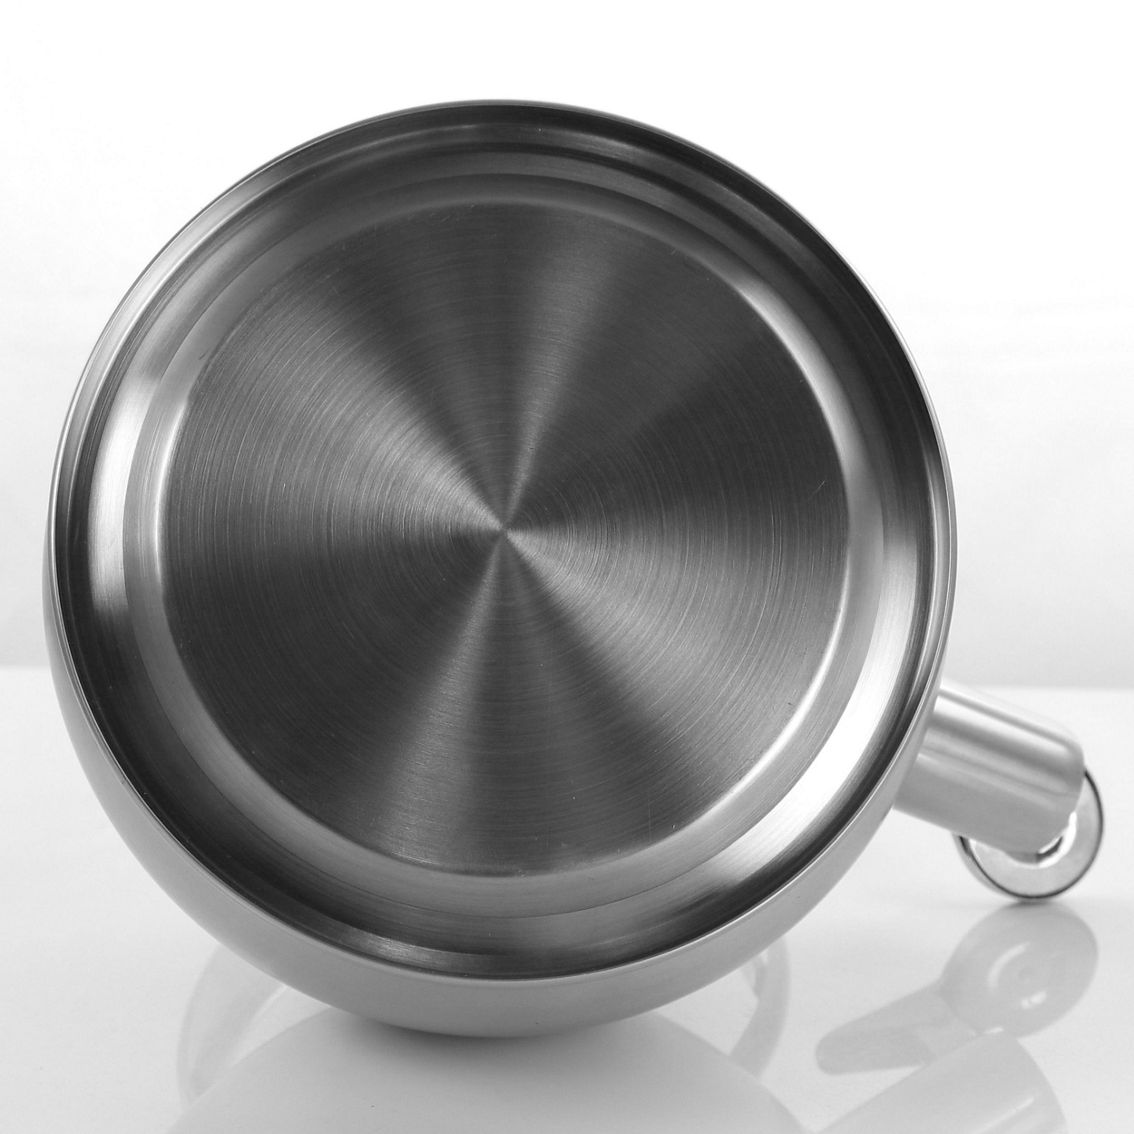 MegaChef 2.8 Liter Round Stovetop Whistling Kettle in Brushed Silver - Image 3 of 5